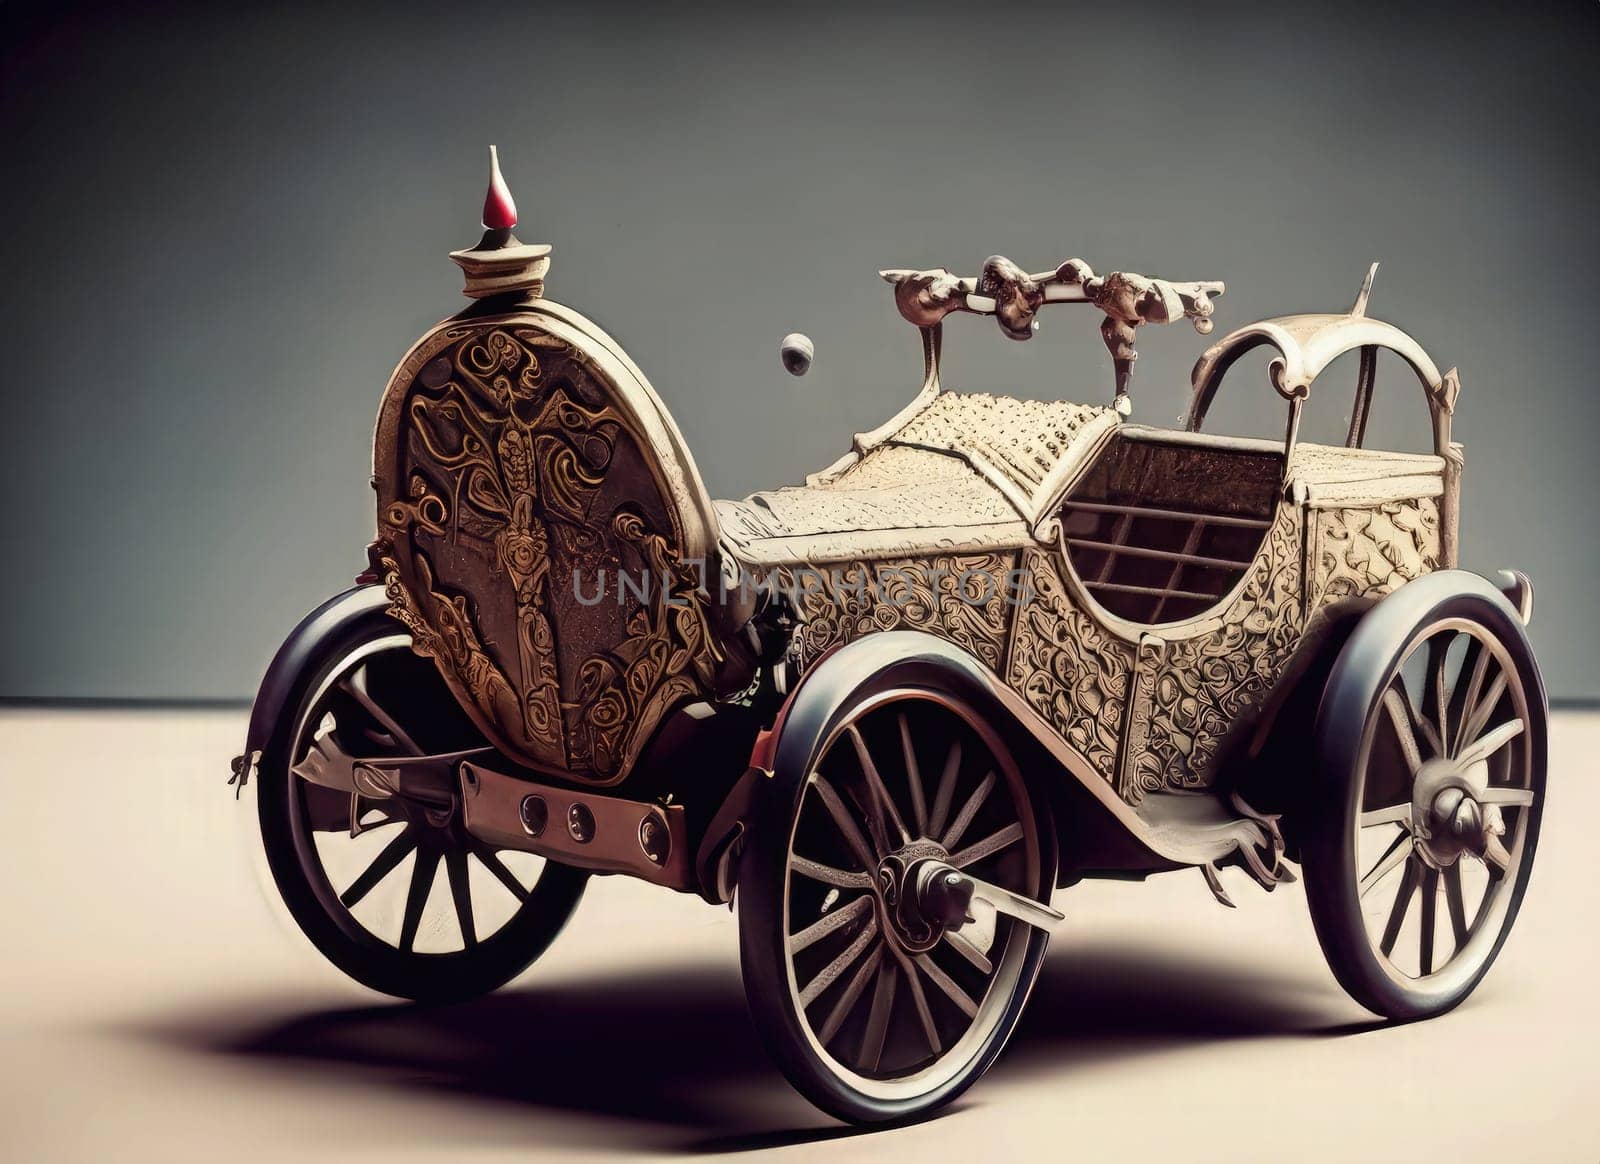 Vintage car in the style of the 19th century. Photo in old color image style. AI Generated.